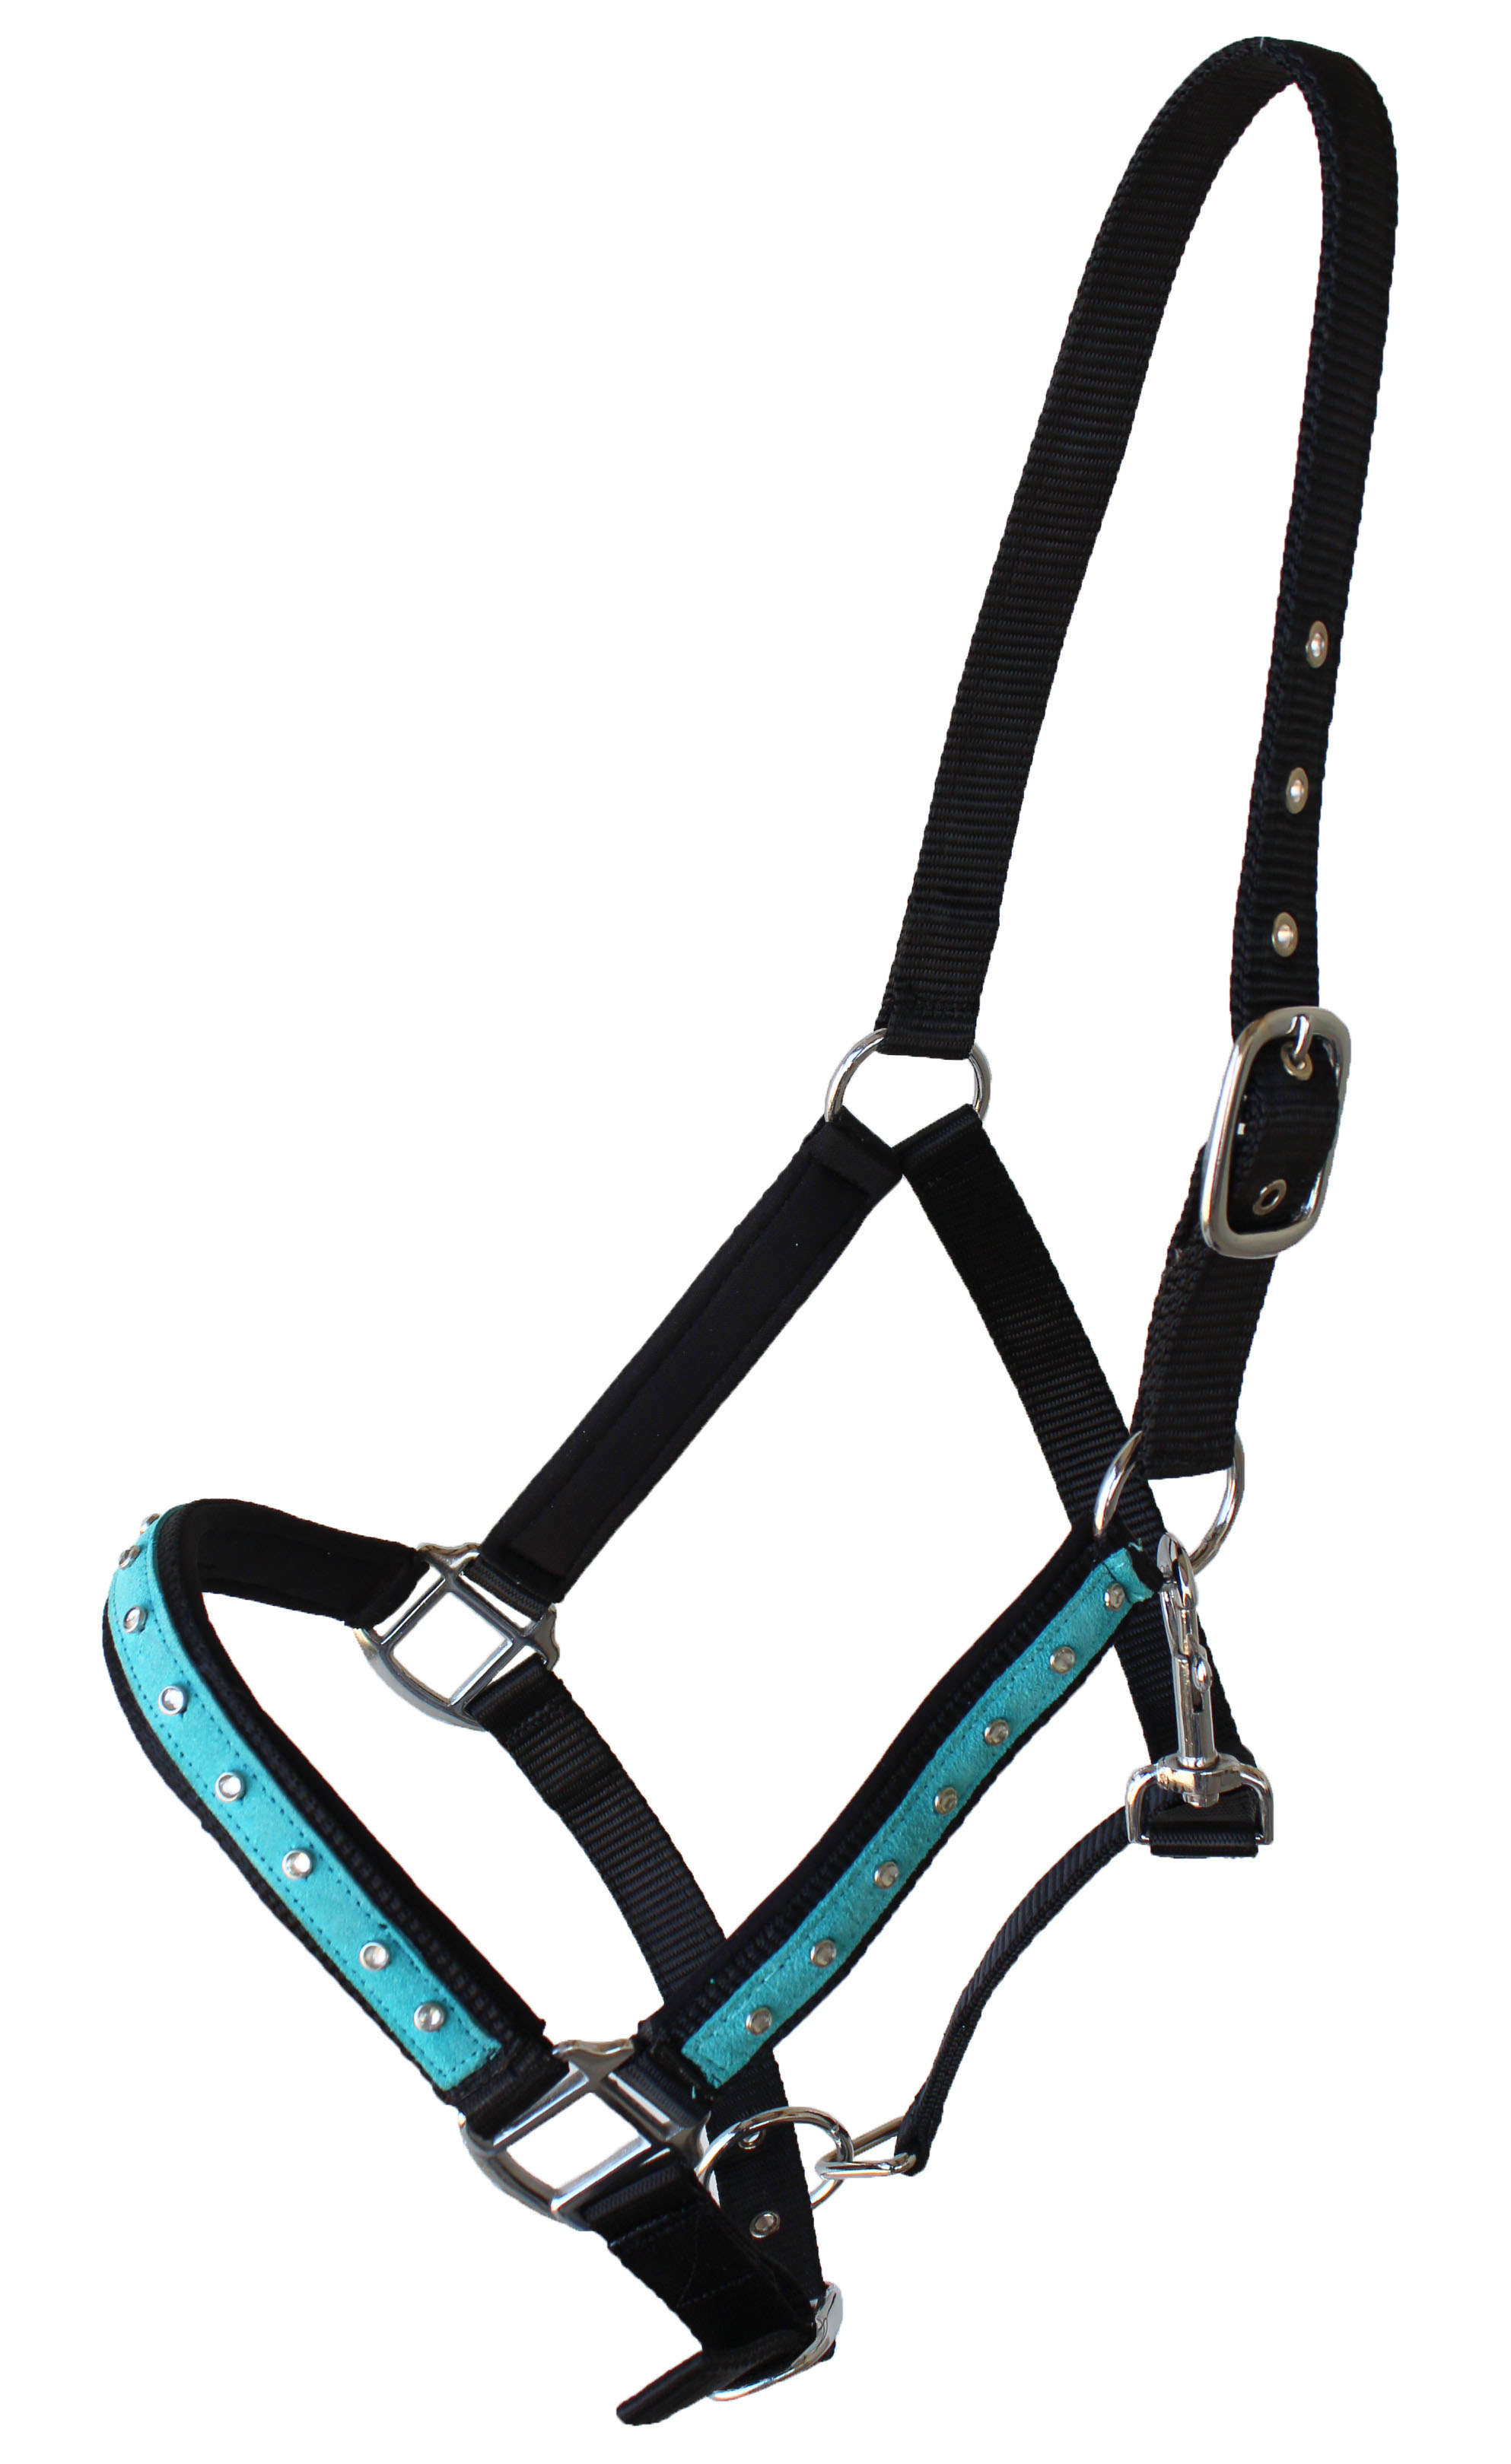 NEW HORSE TACK! RED Horse Size Nylon Combination Halter Bridle With 7' Reins